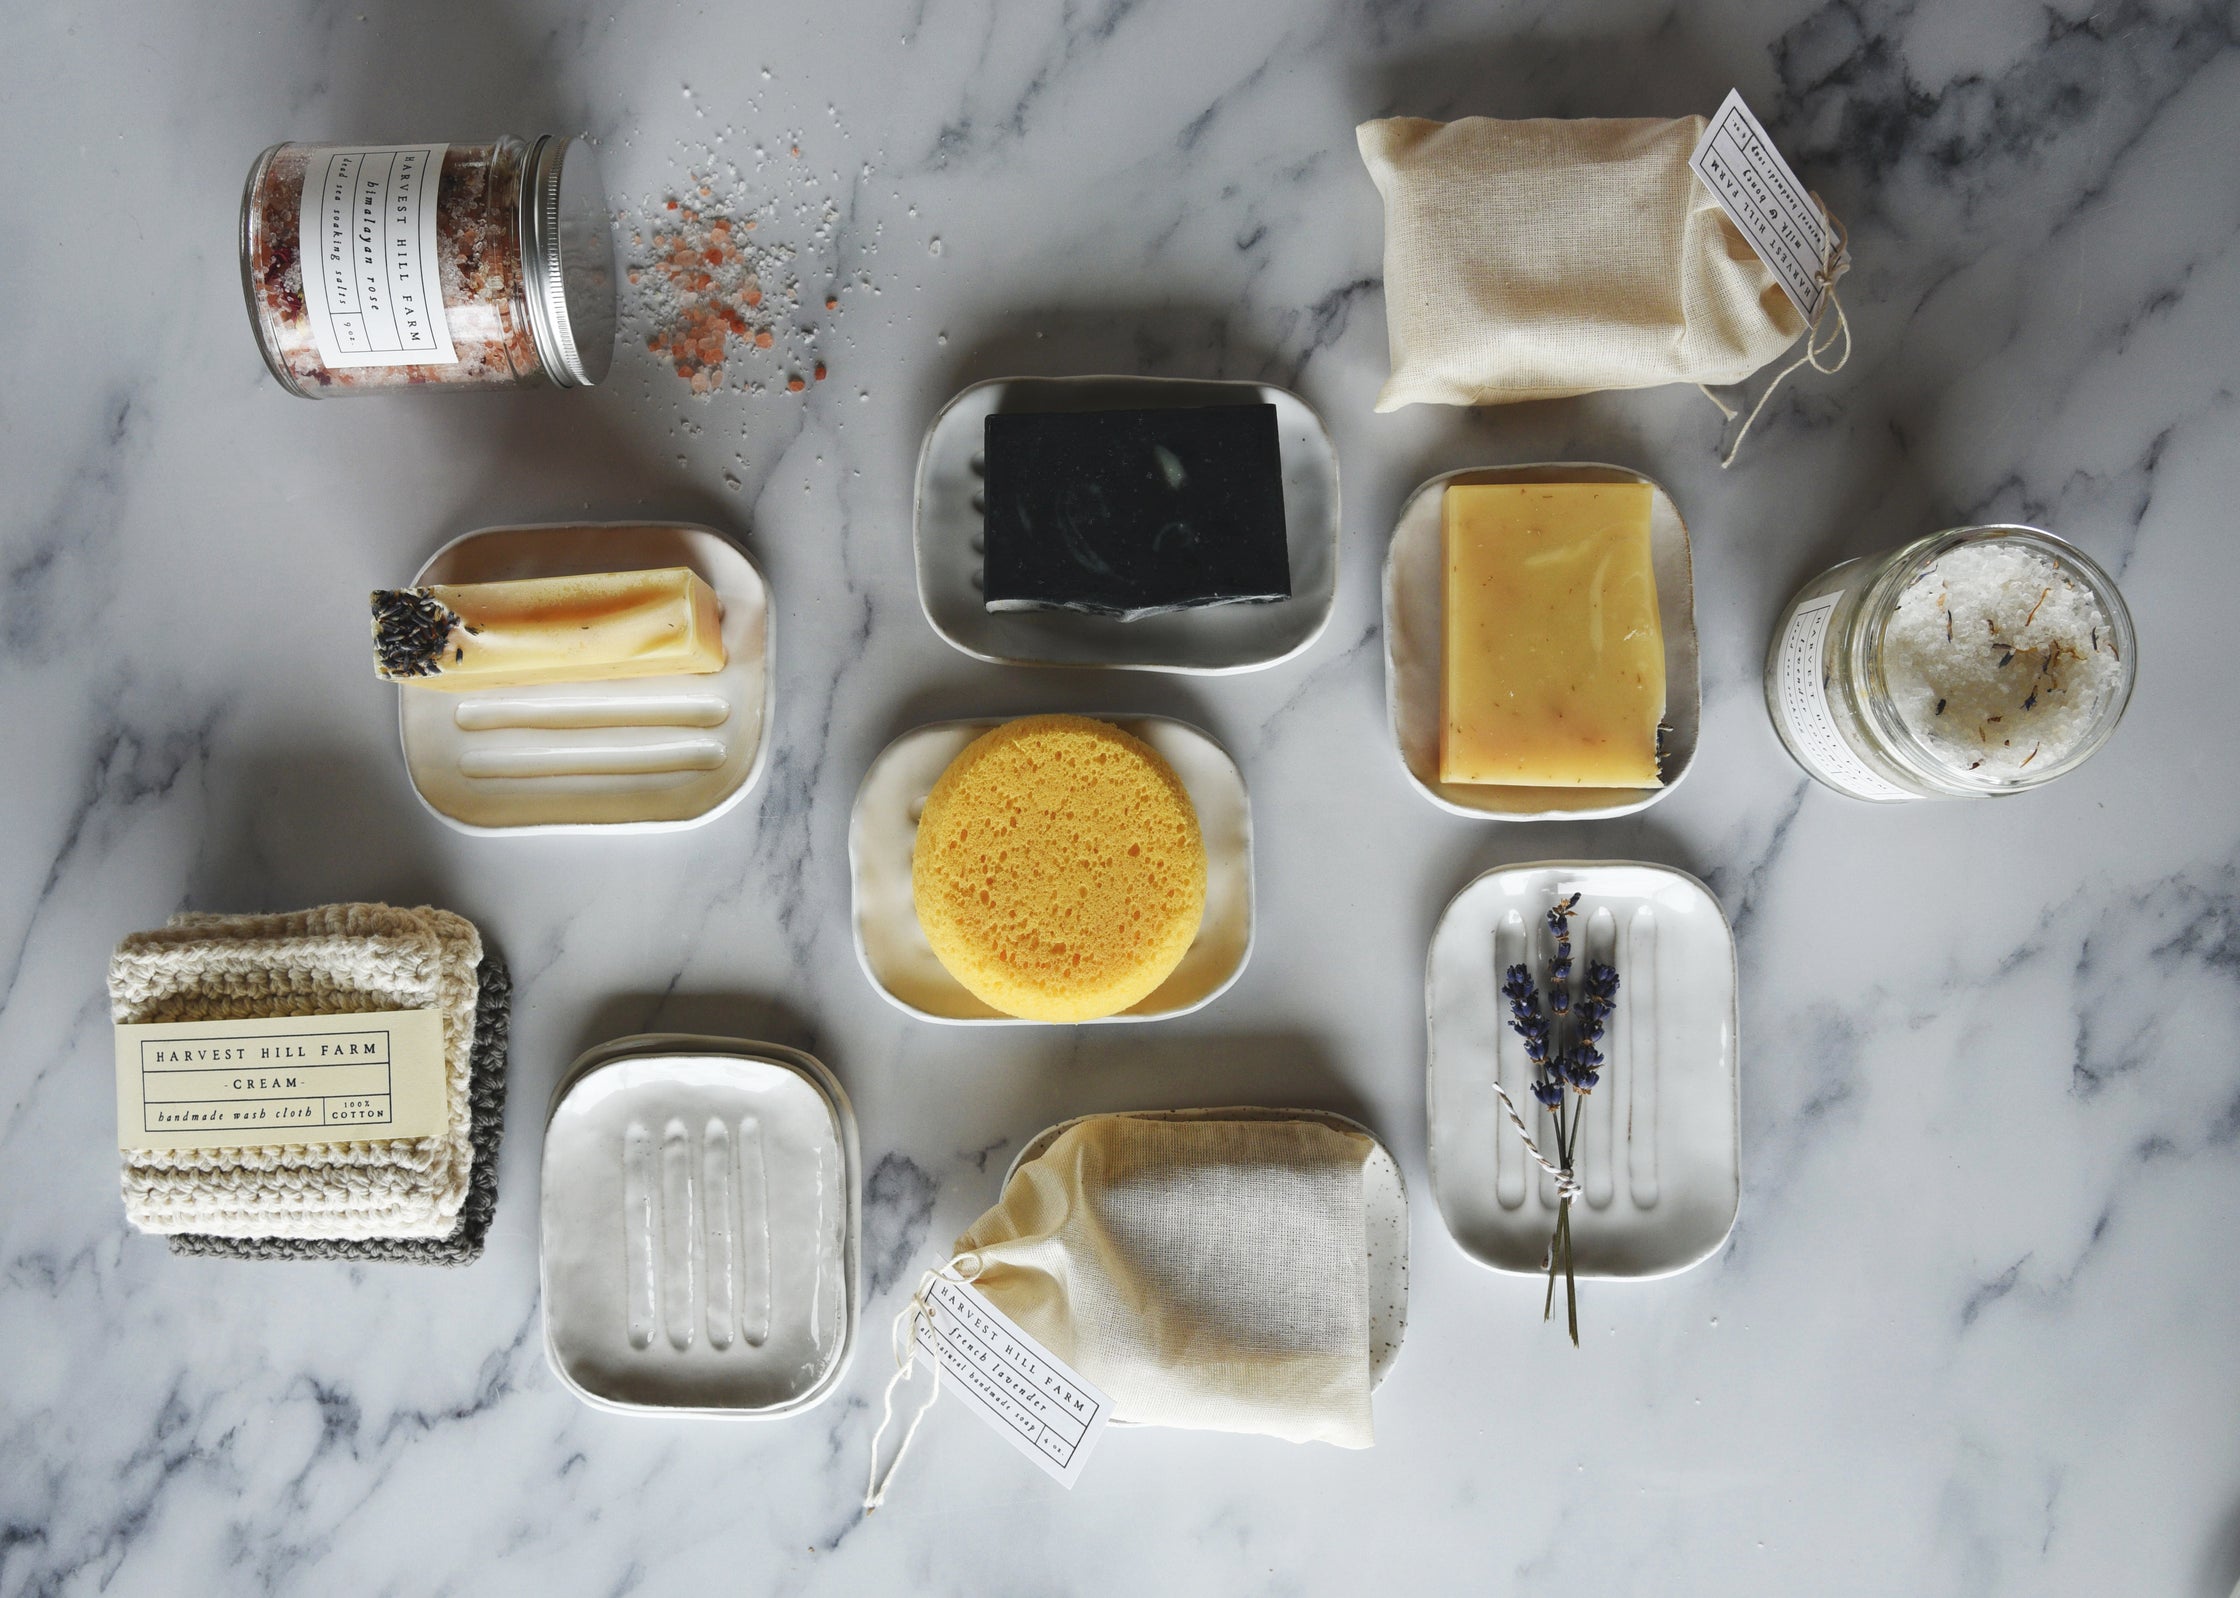 Flat lay of soaps, ceramic soap dishes and cotton cloths with botanicals on a marble background